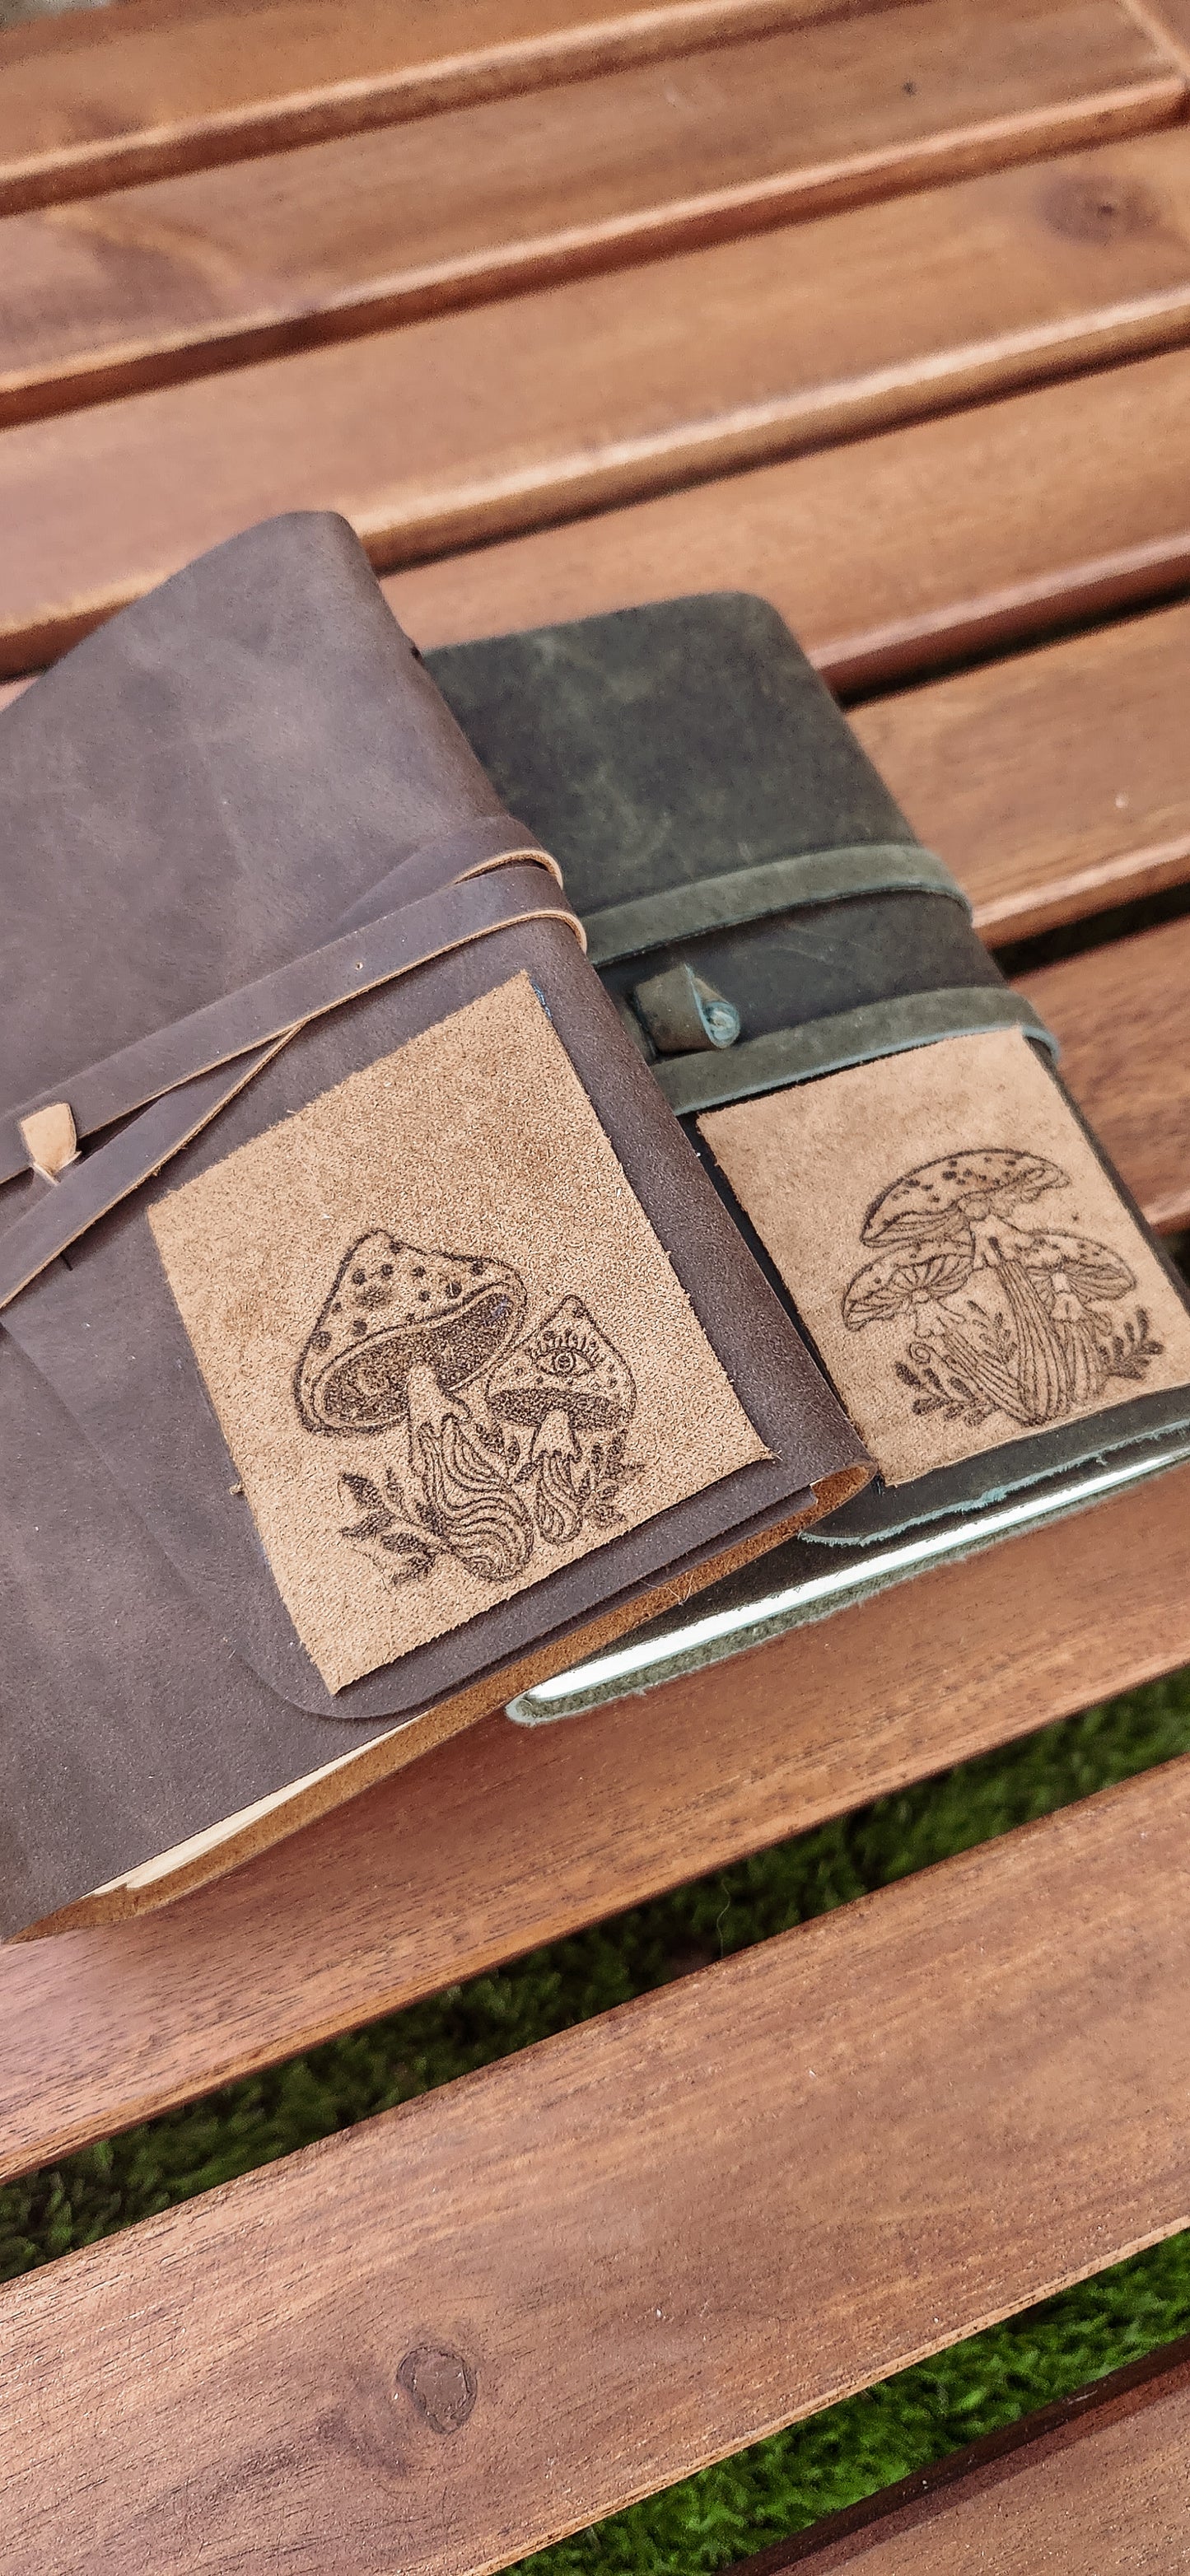 The patch leather journal & Sketchbook